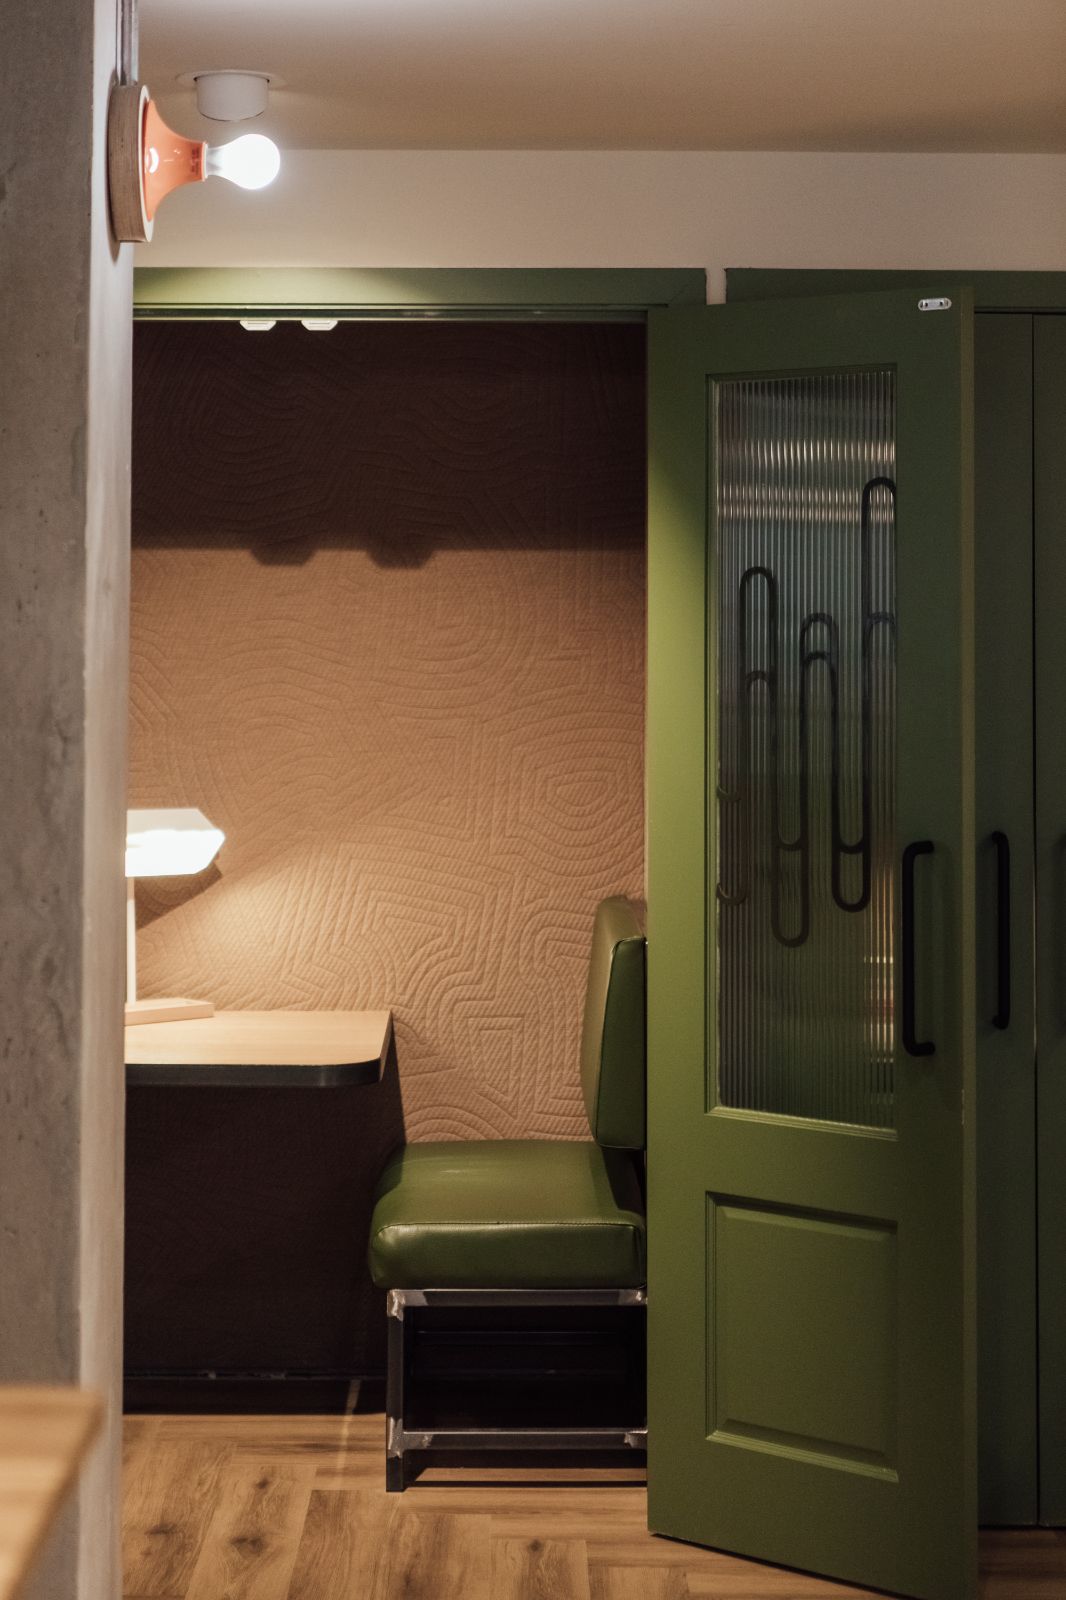 Telephone booth in Hairpin House lobby. Khaki green seat with pale pink fabric coated wall. Green folding doors.